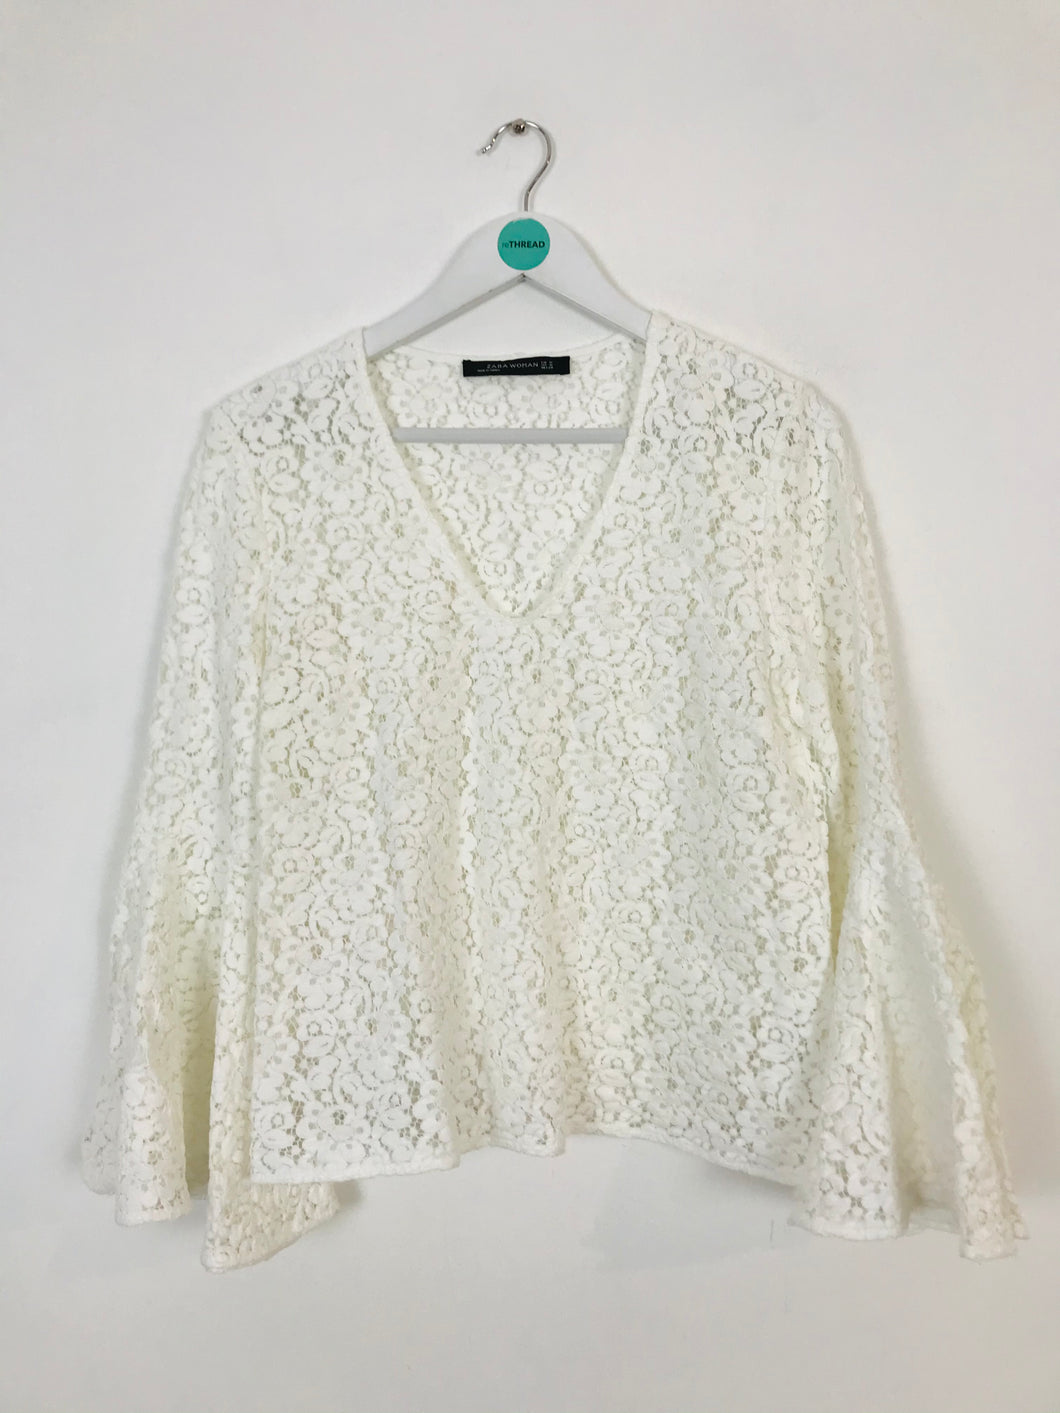 Zara Women’s Floral Lace Flare Sleeve Top Blouse | M | White